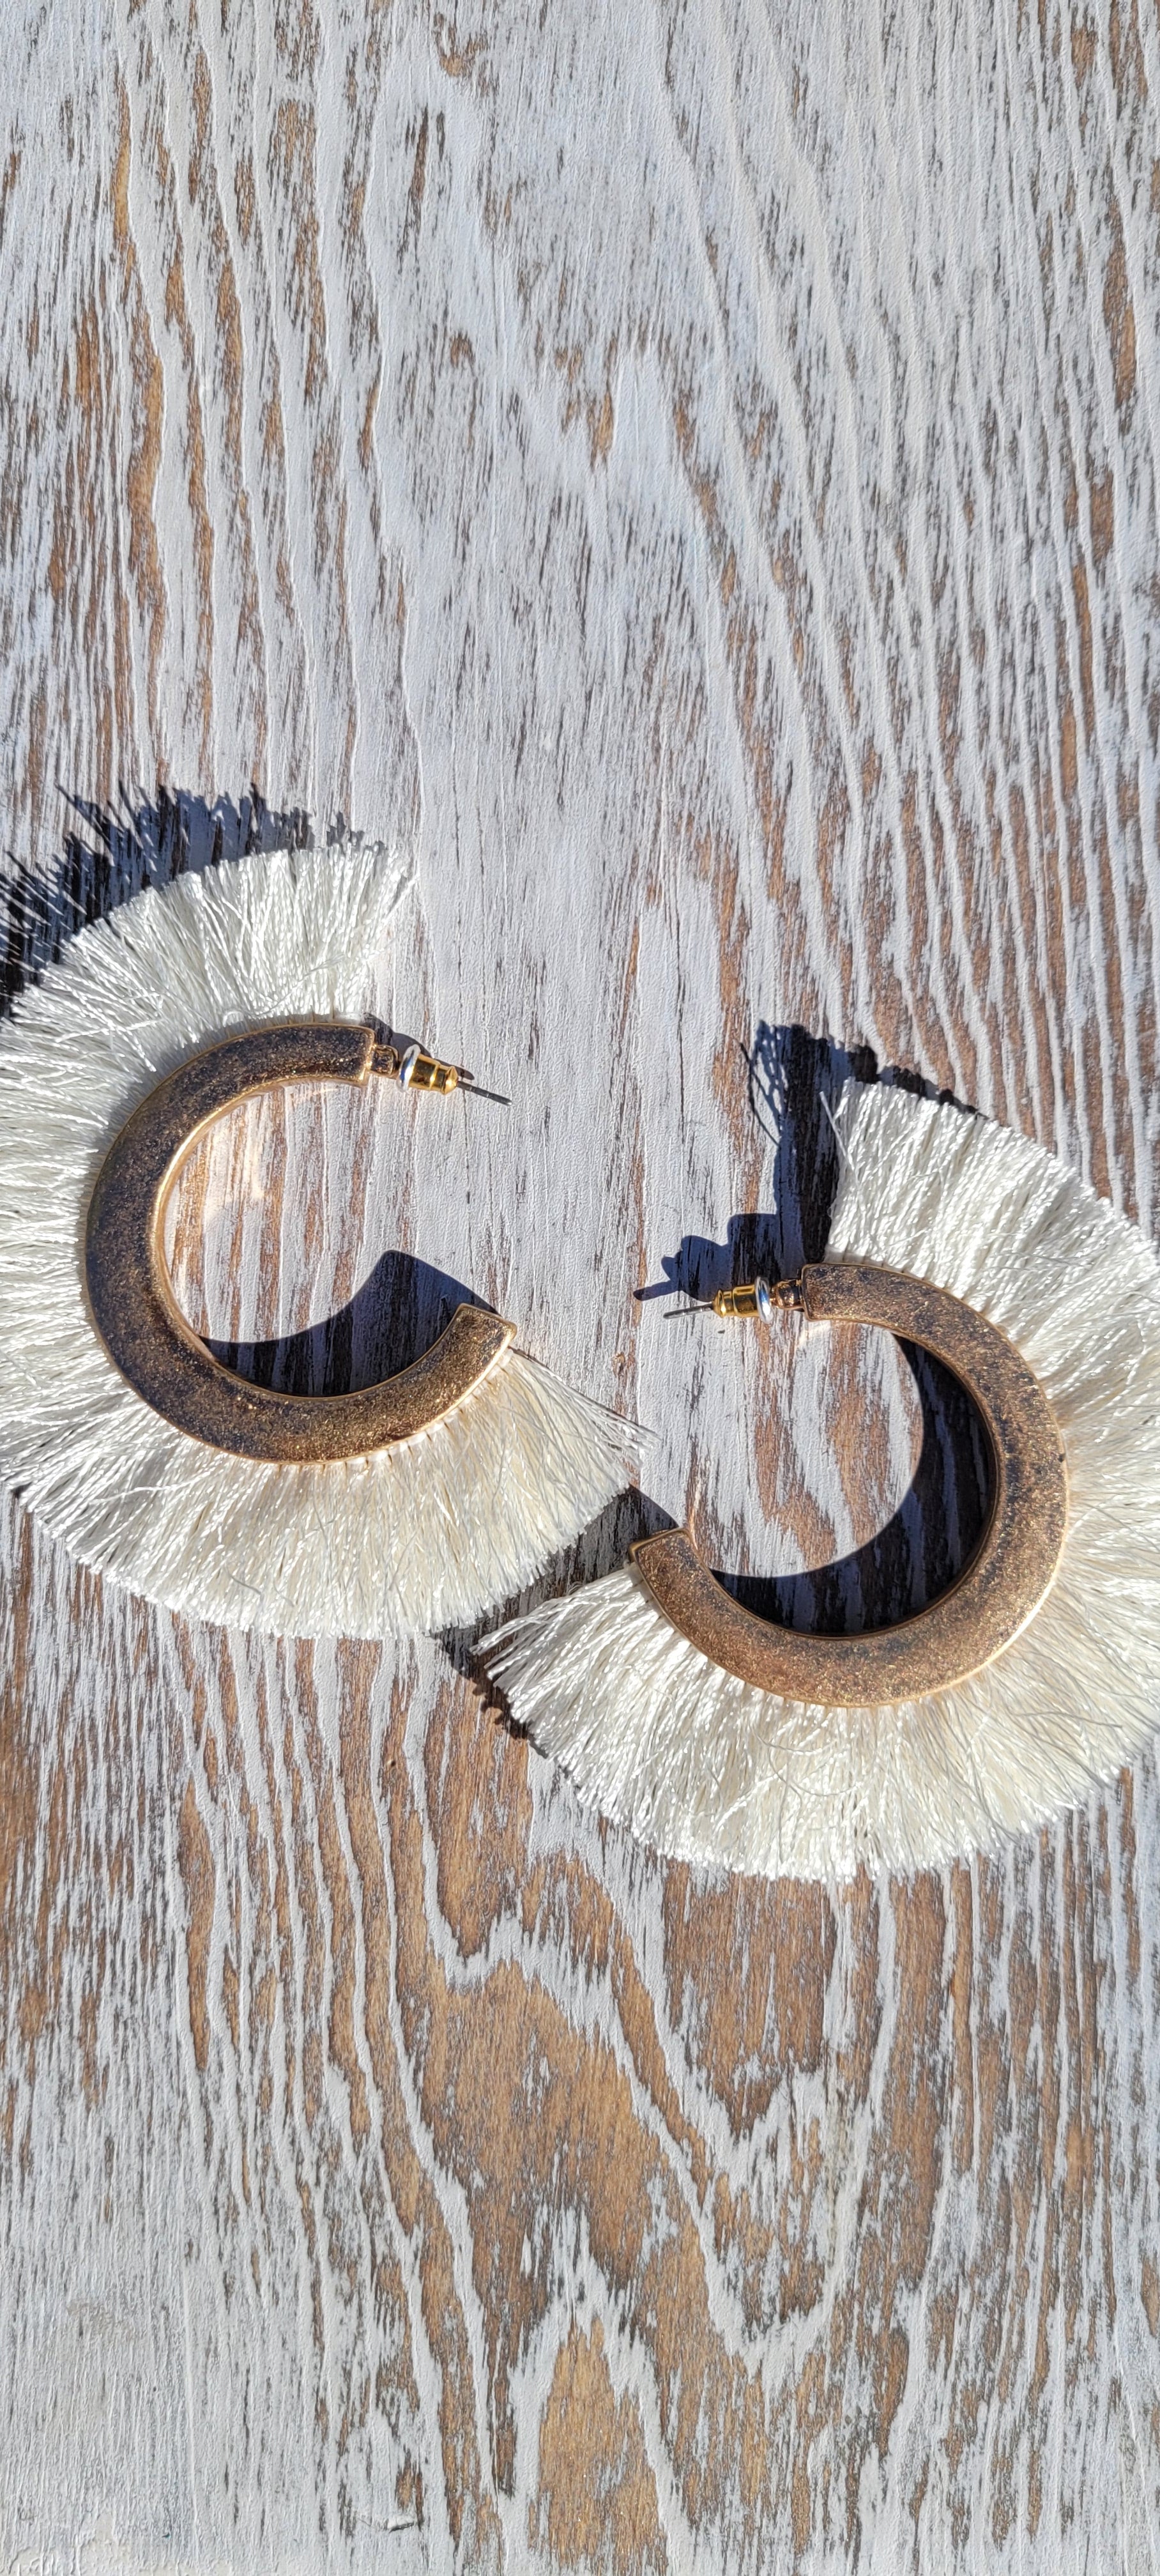 Ivory tassels Brushed gold hoops Brushed gold stud earrings Metal earring back Diameter 3” Whether you want to be on the wild side or classy this earring set it will add a fun touch to your outfit